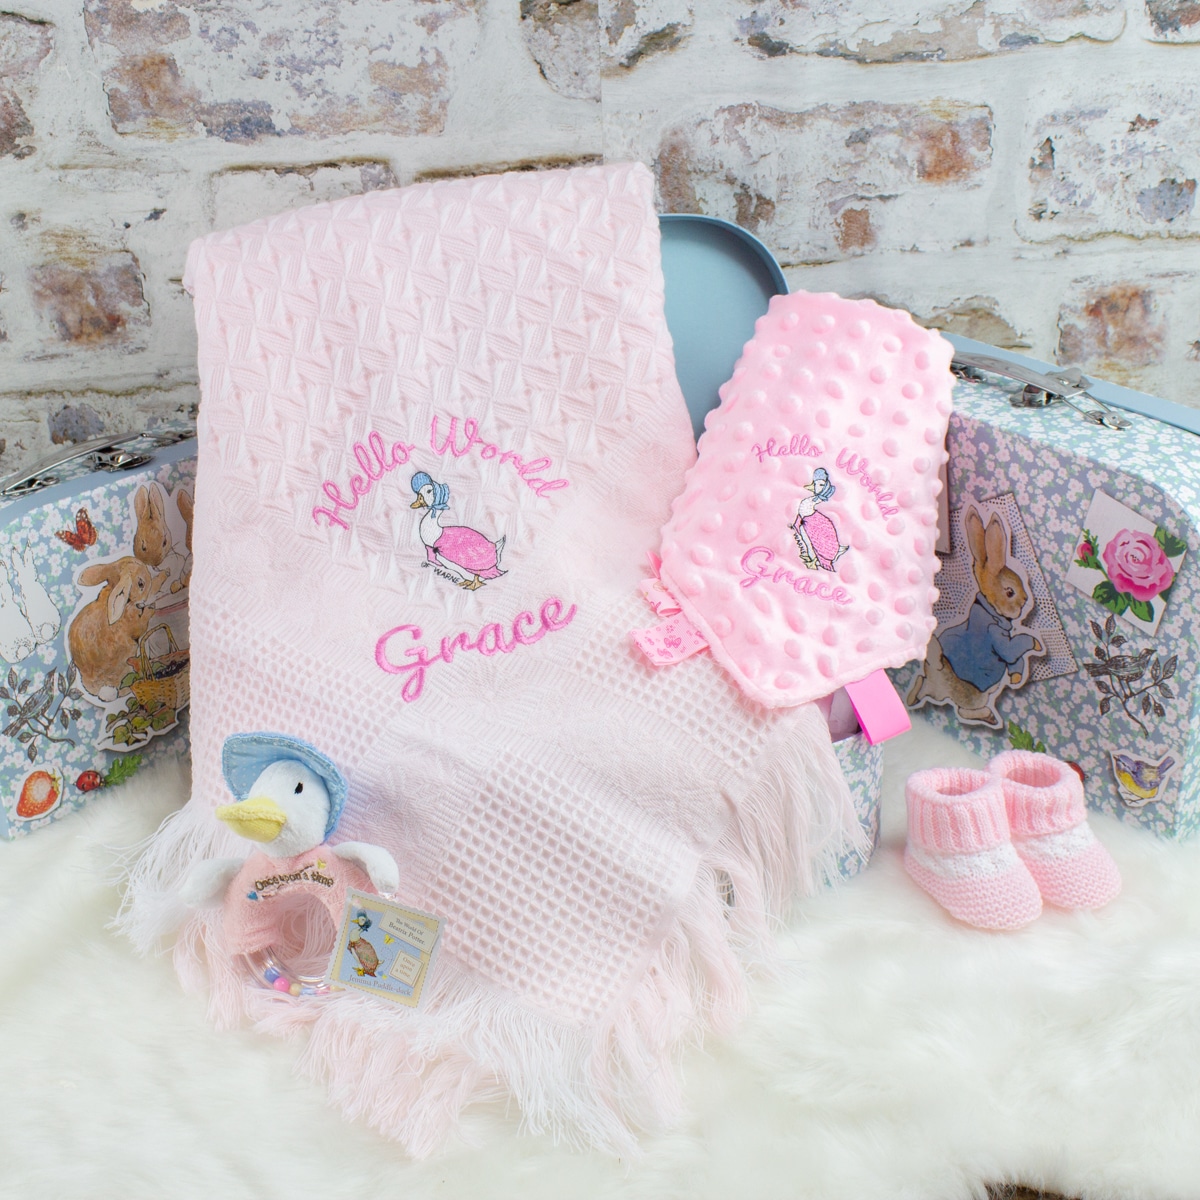 Personalised Jemima Puddle-Duck ‘Snuggle’ Baby Gift Hamper